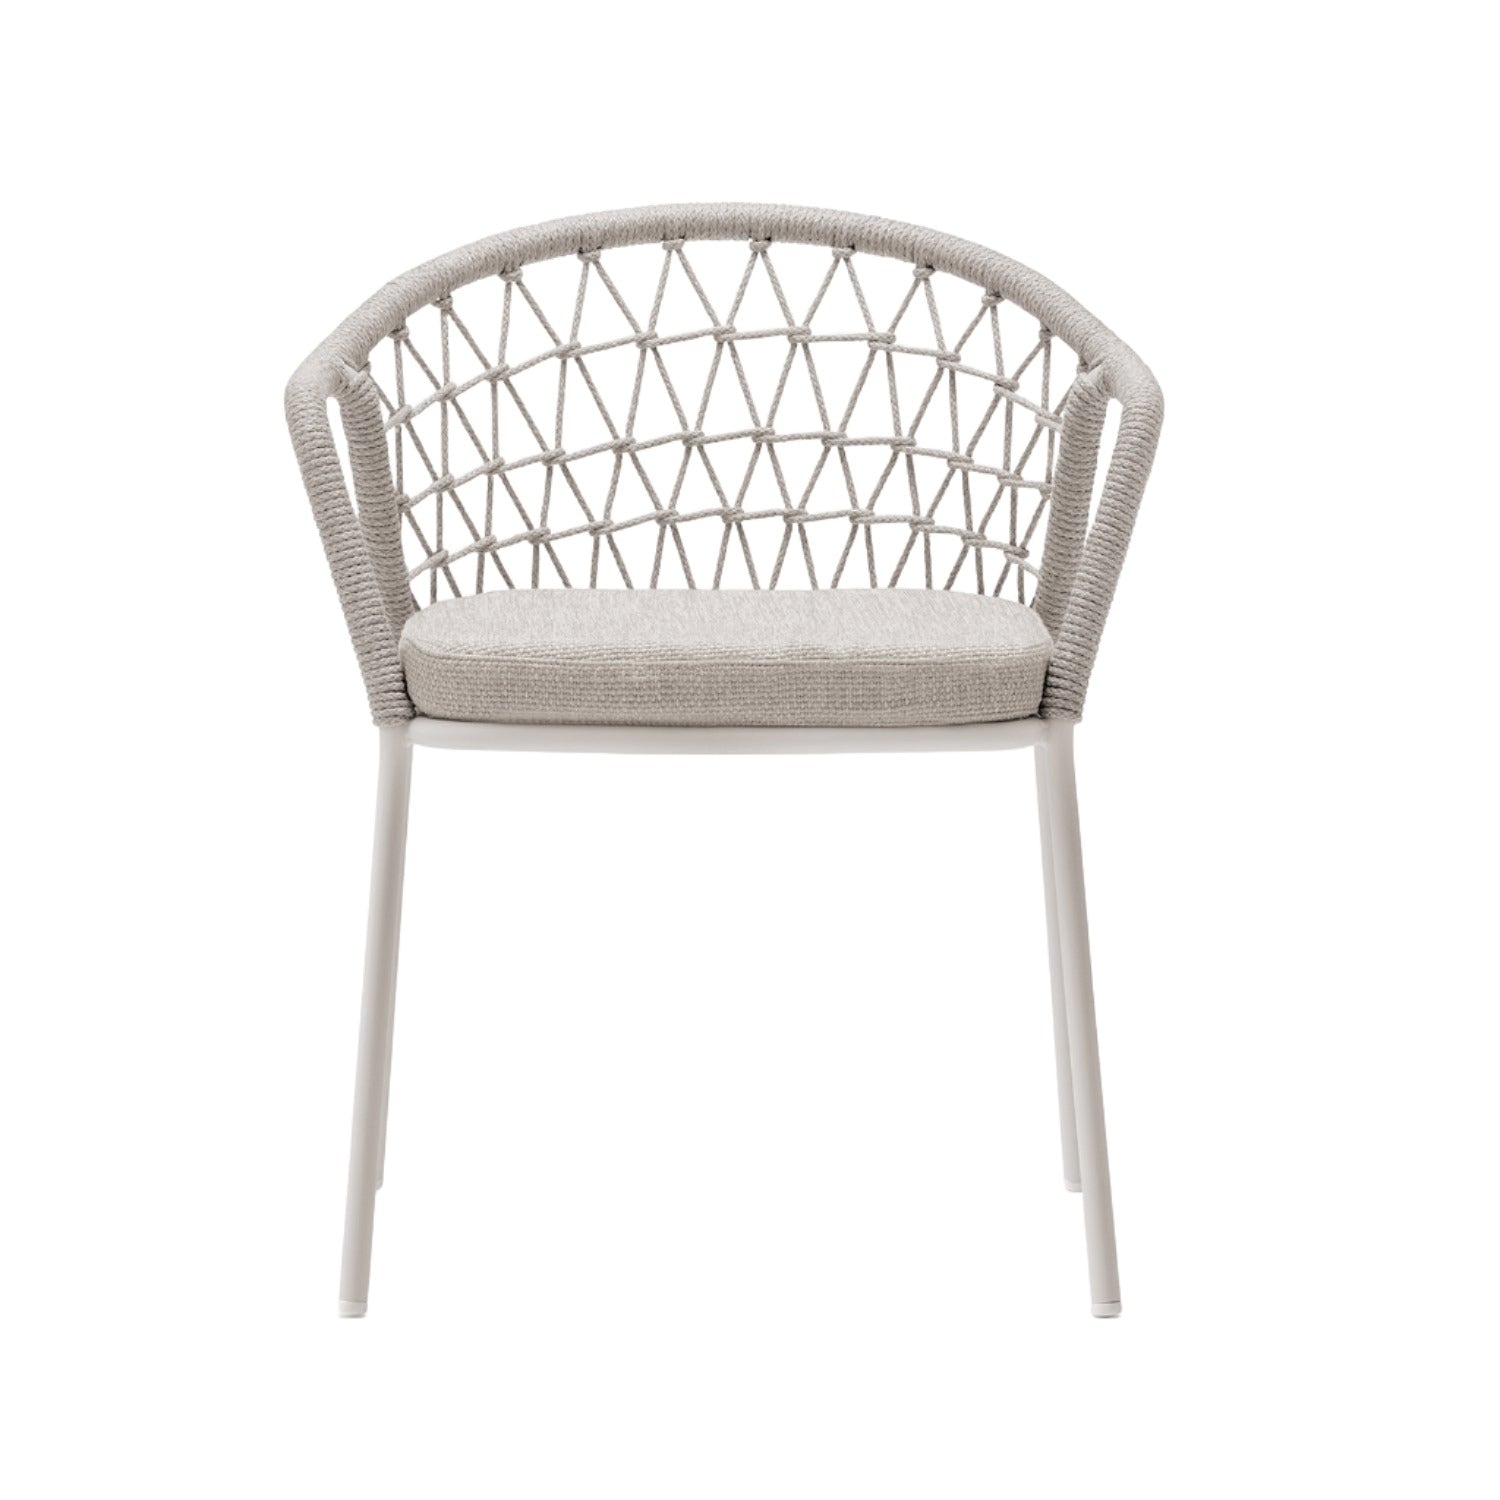 Pedrali Panarea 3675 Outdoor Dining Chair in white